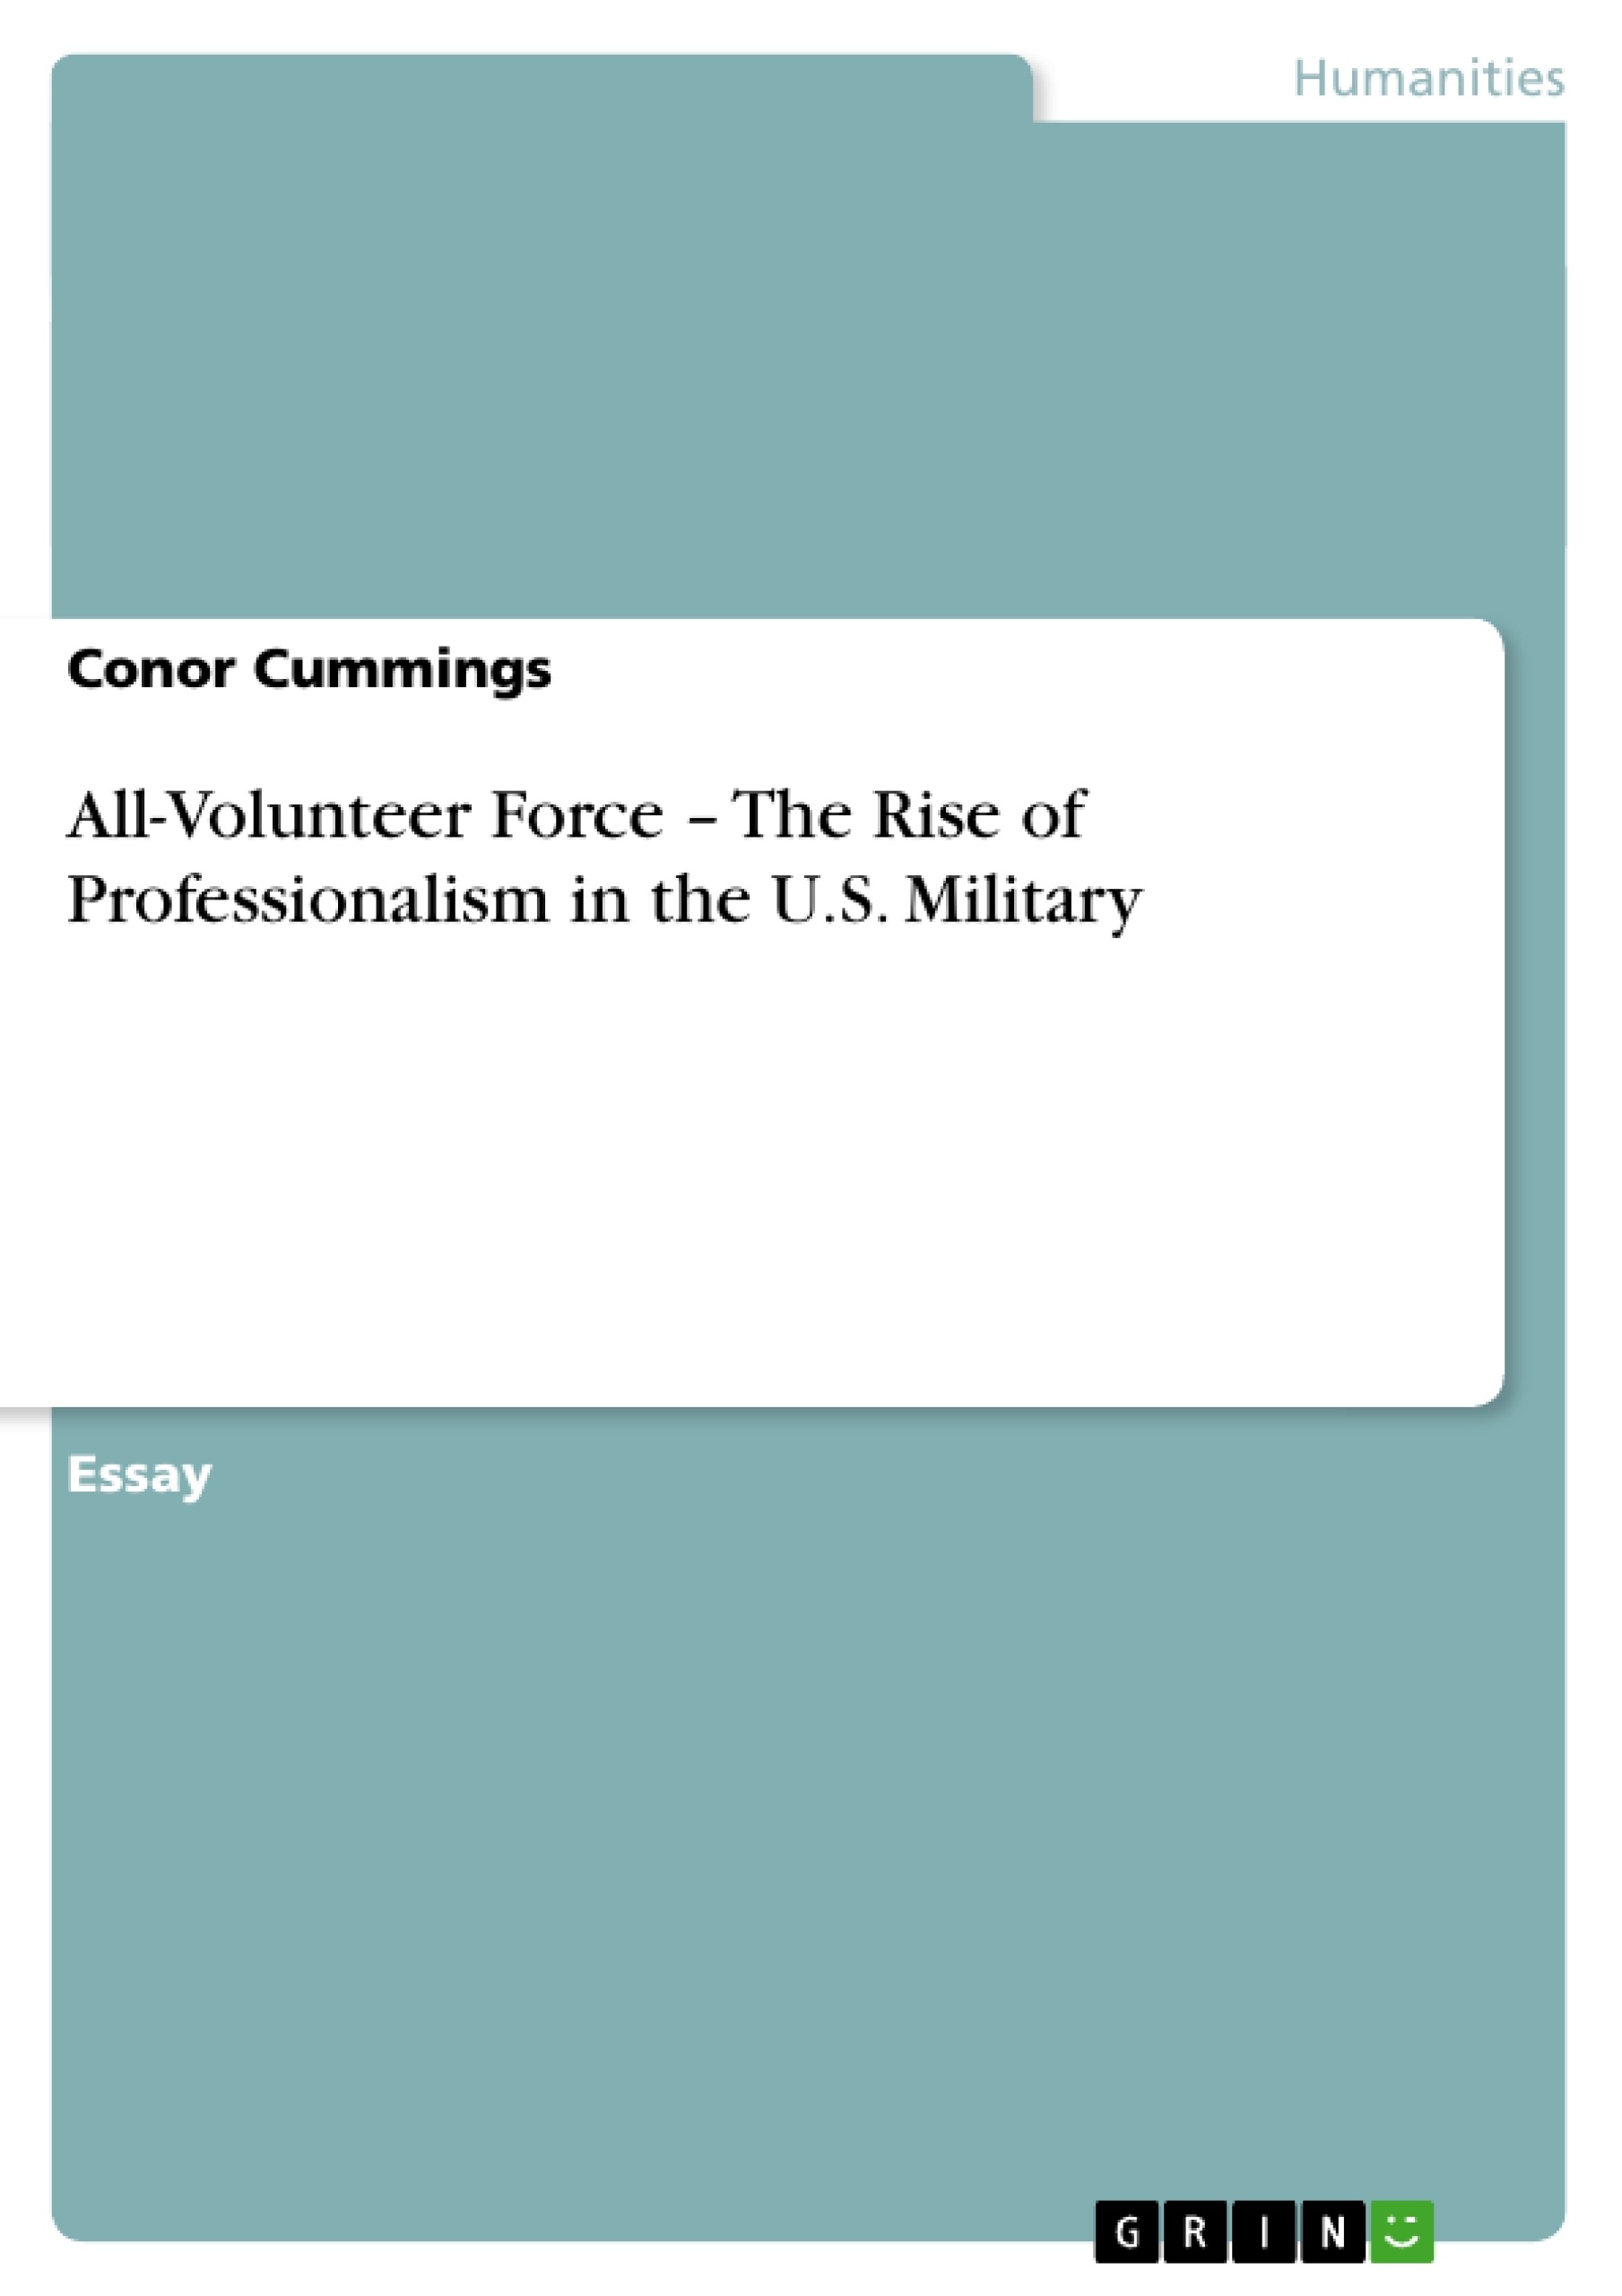 Title: All-Volunteer Force – The Rise of Professionalism in the U.S. Military